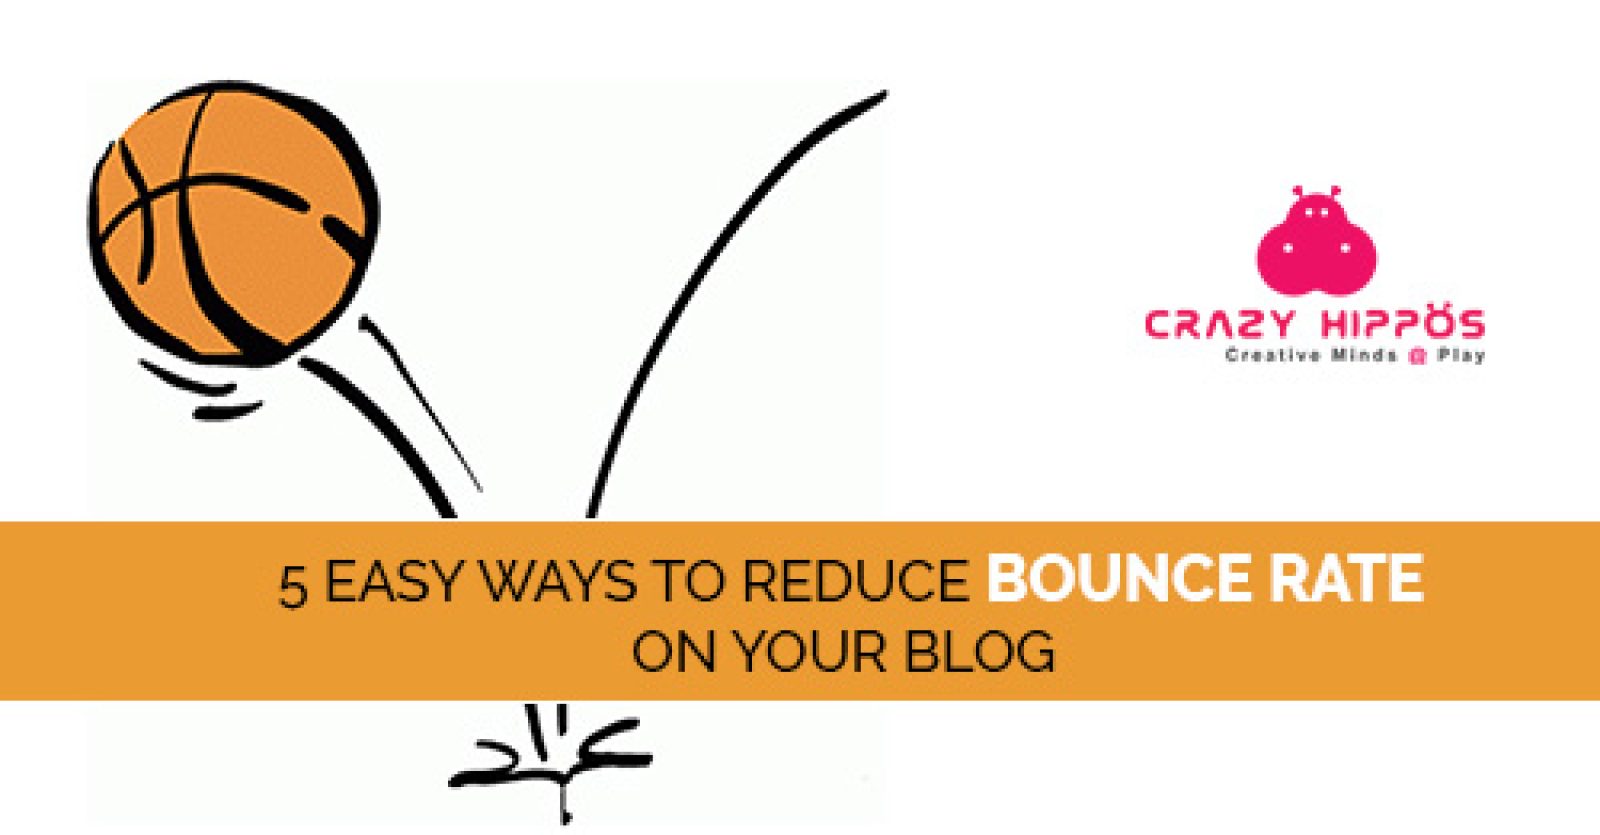 5 EASY WAYS TO REDUCE BOUNCE RATE ON YOUR BLOG